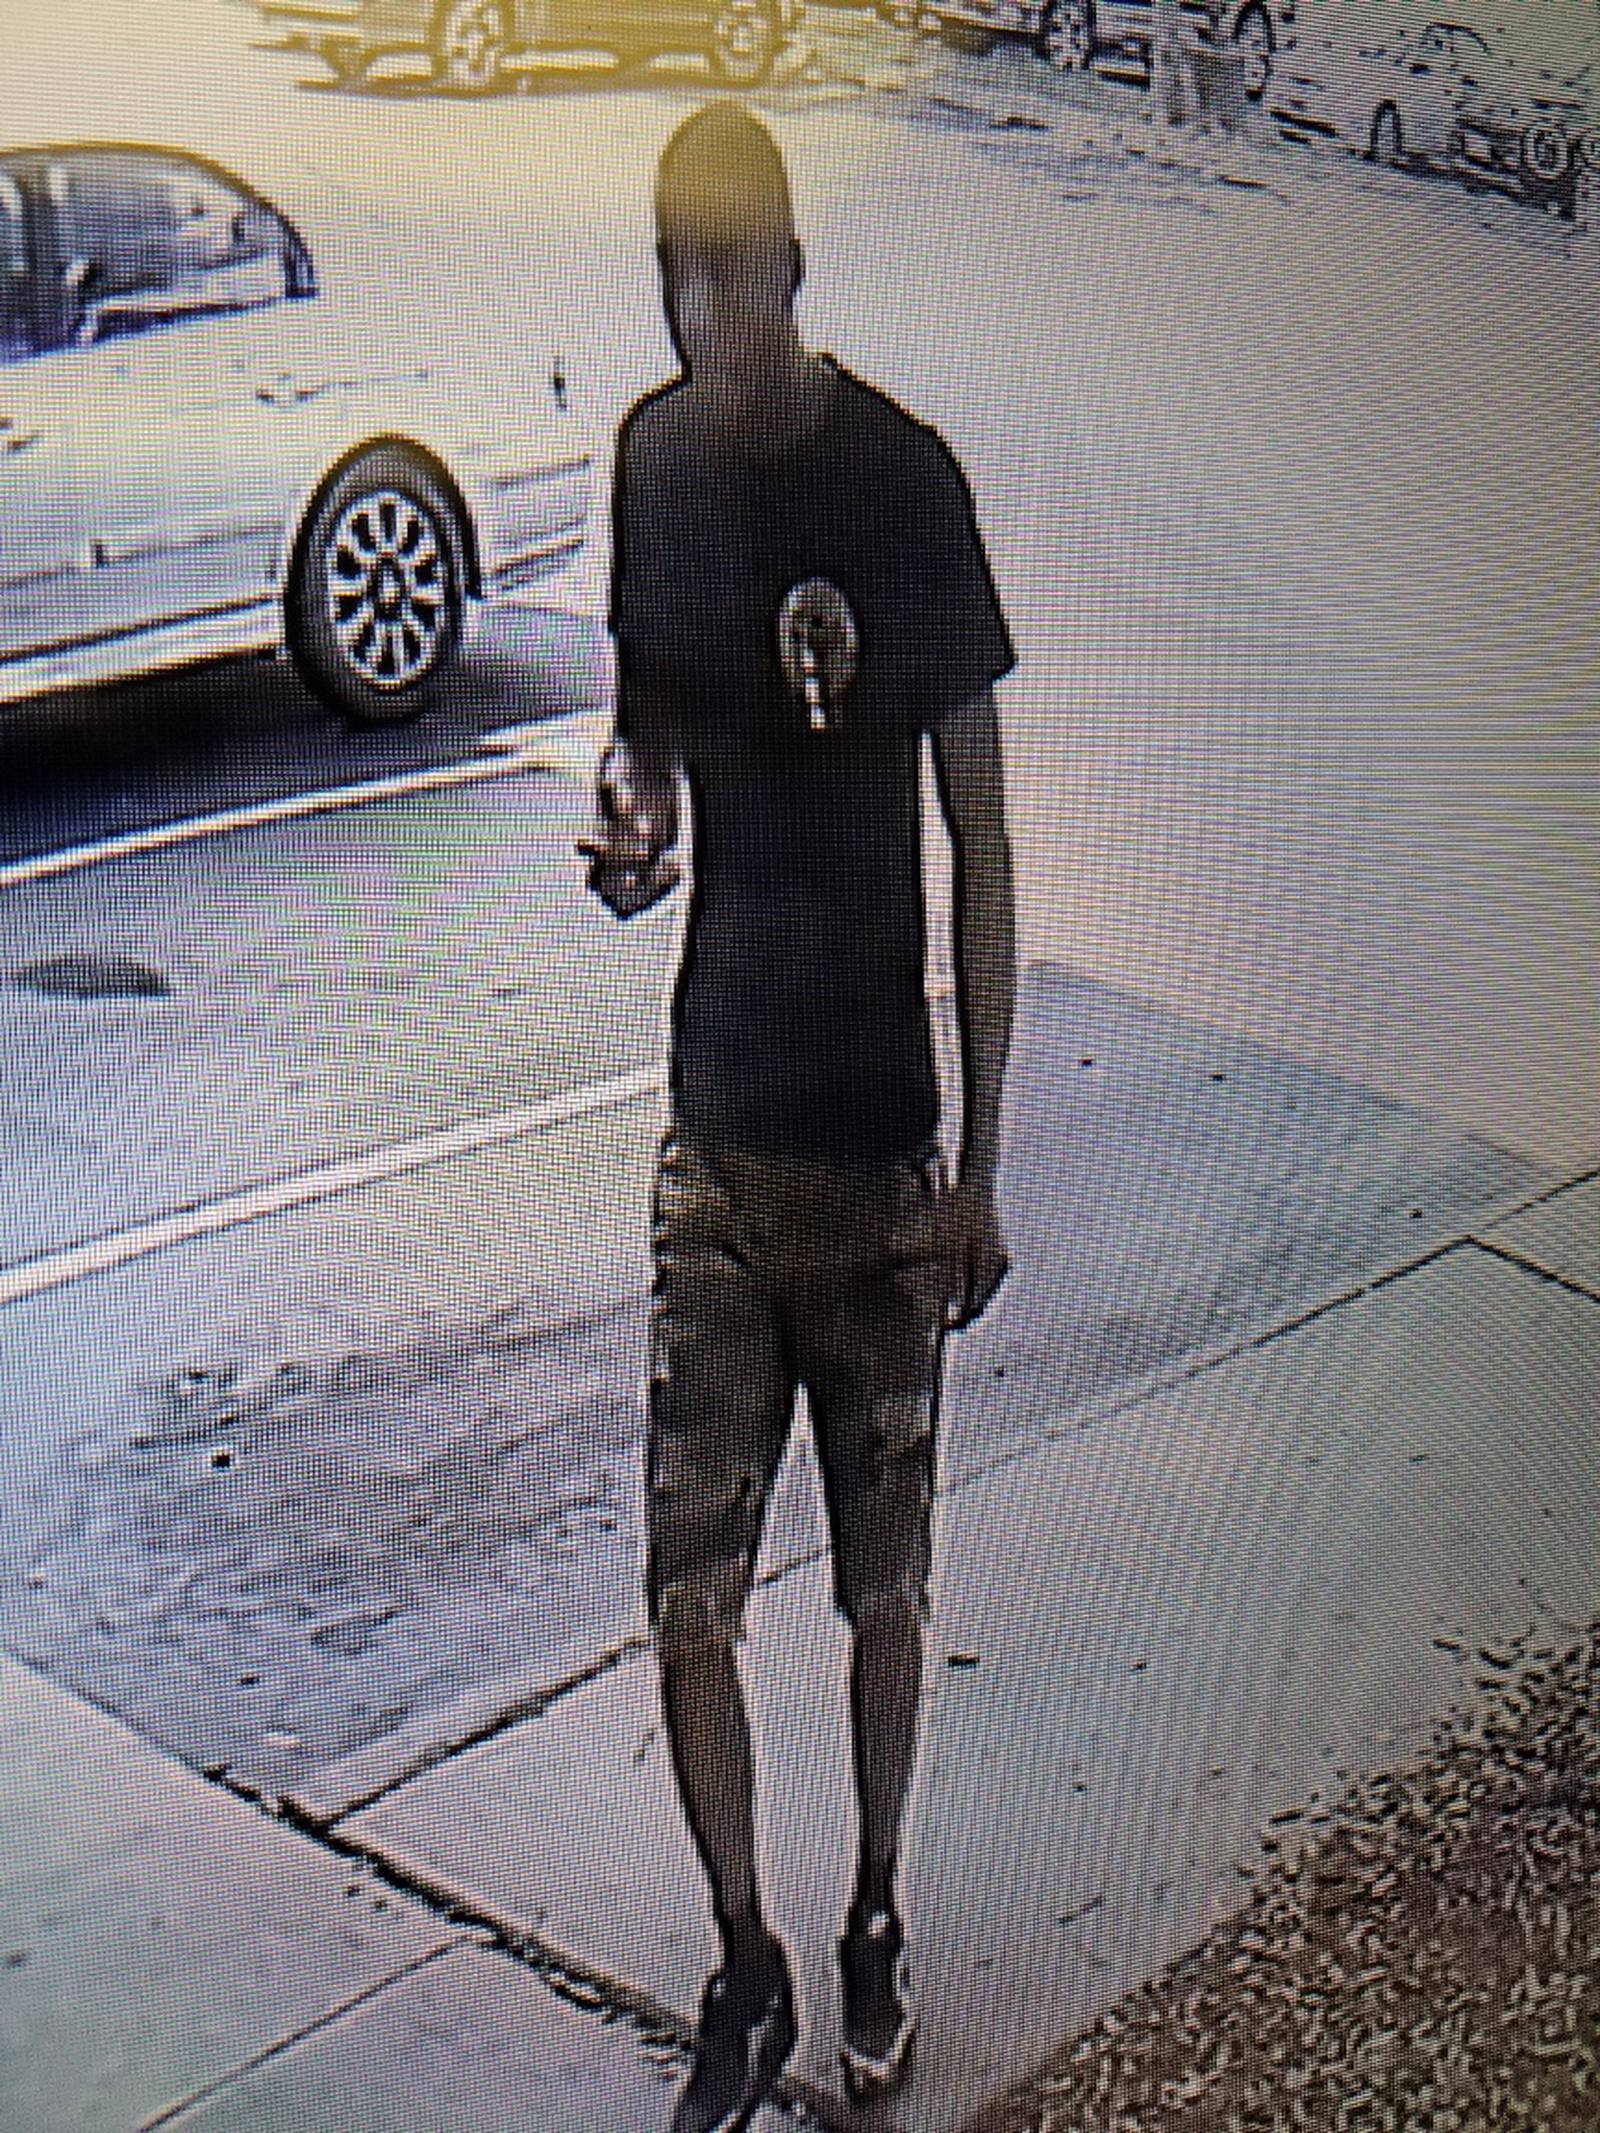 Photos Jso Working To Identify Southside Sexual Battery Suspect 104